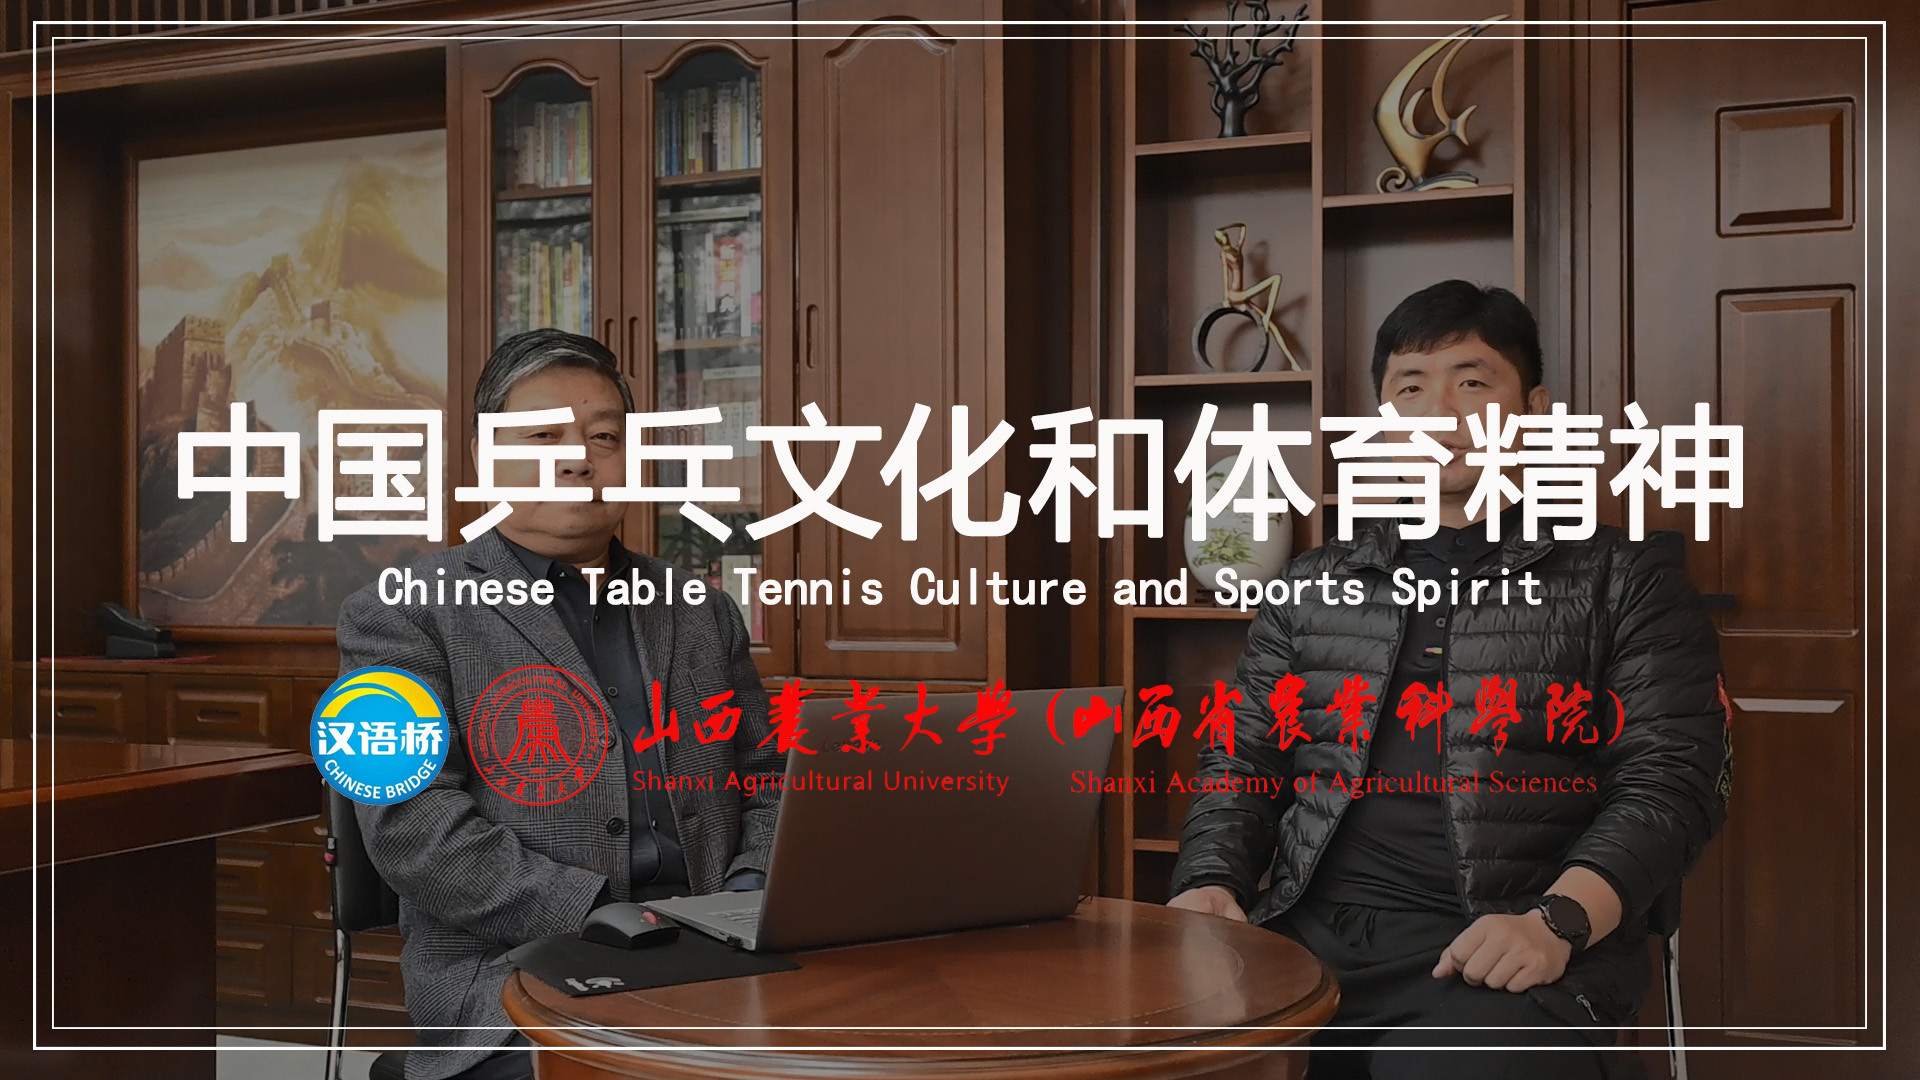 Chinese Table Tennis Culture and Sports Spirit